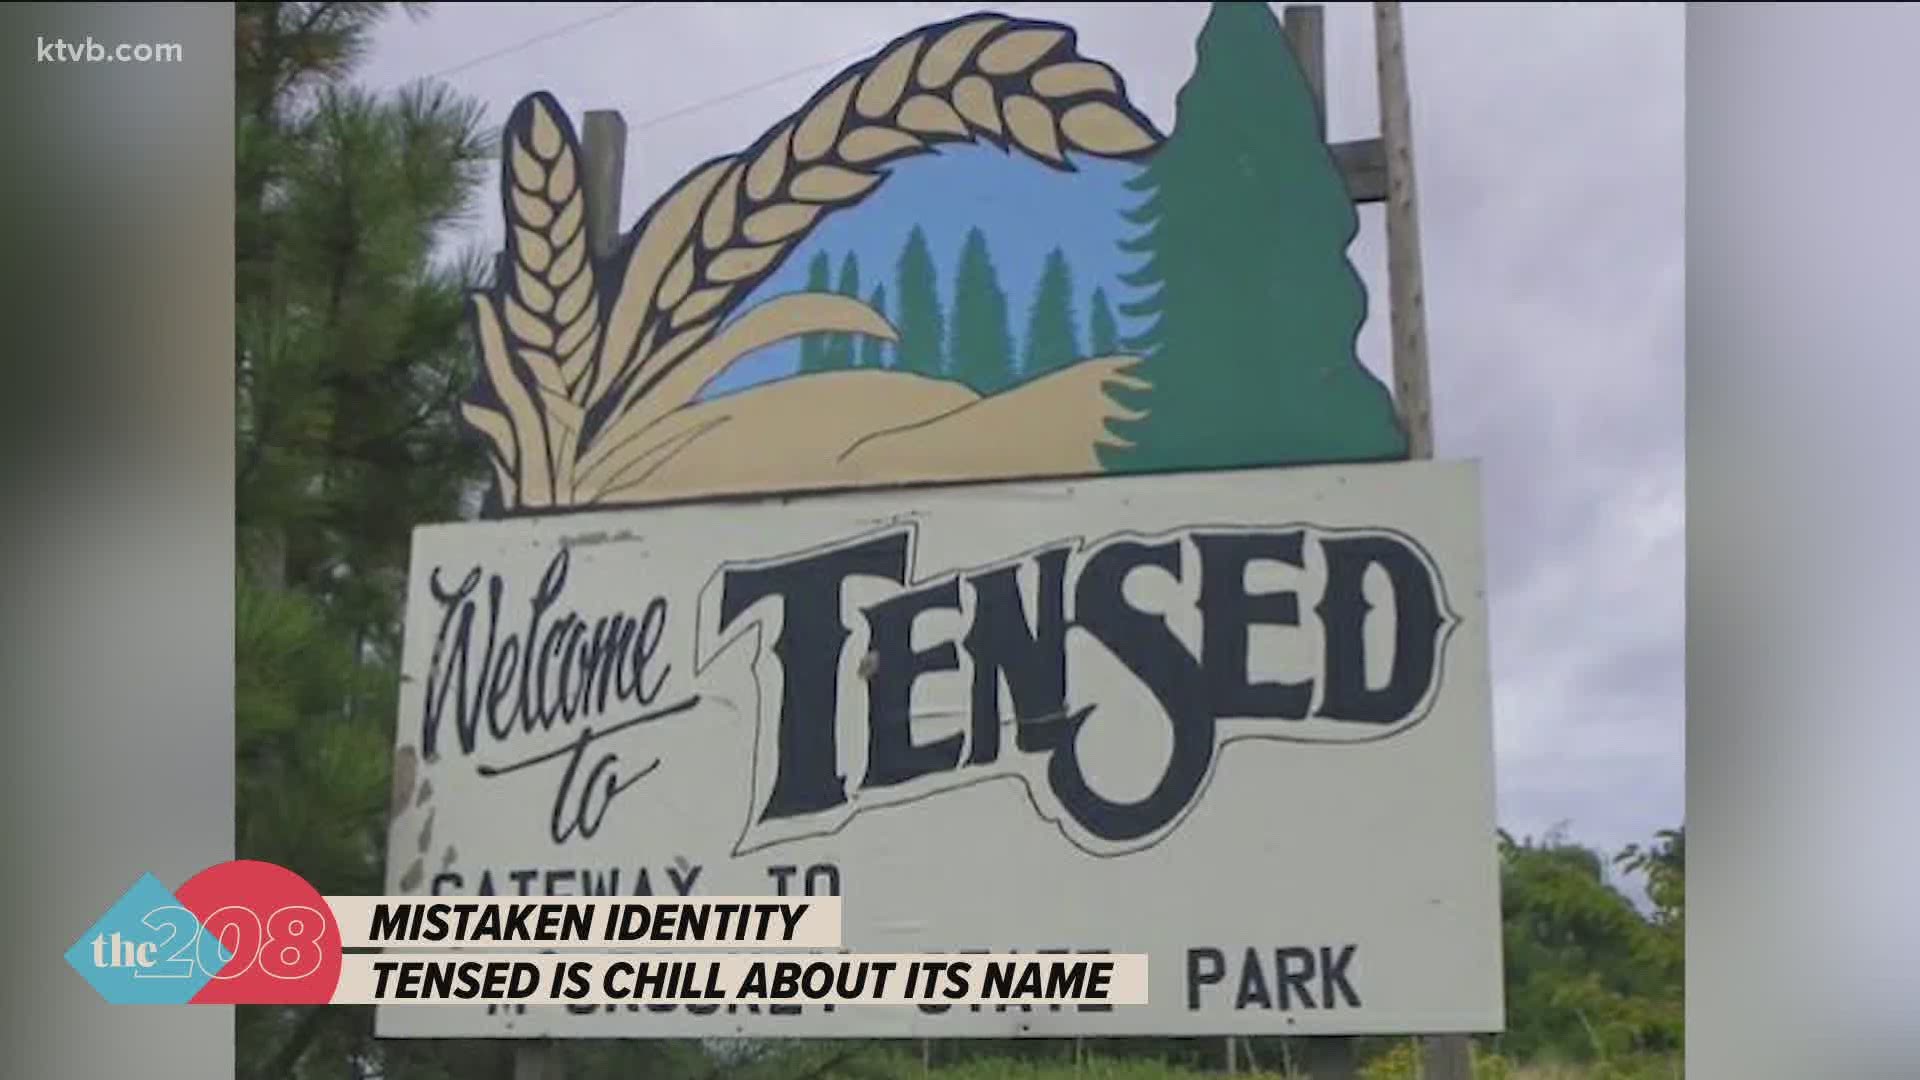 With less than 150 people, Tensed is a prime example of a small city. But just how did this tiny town come to be?